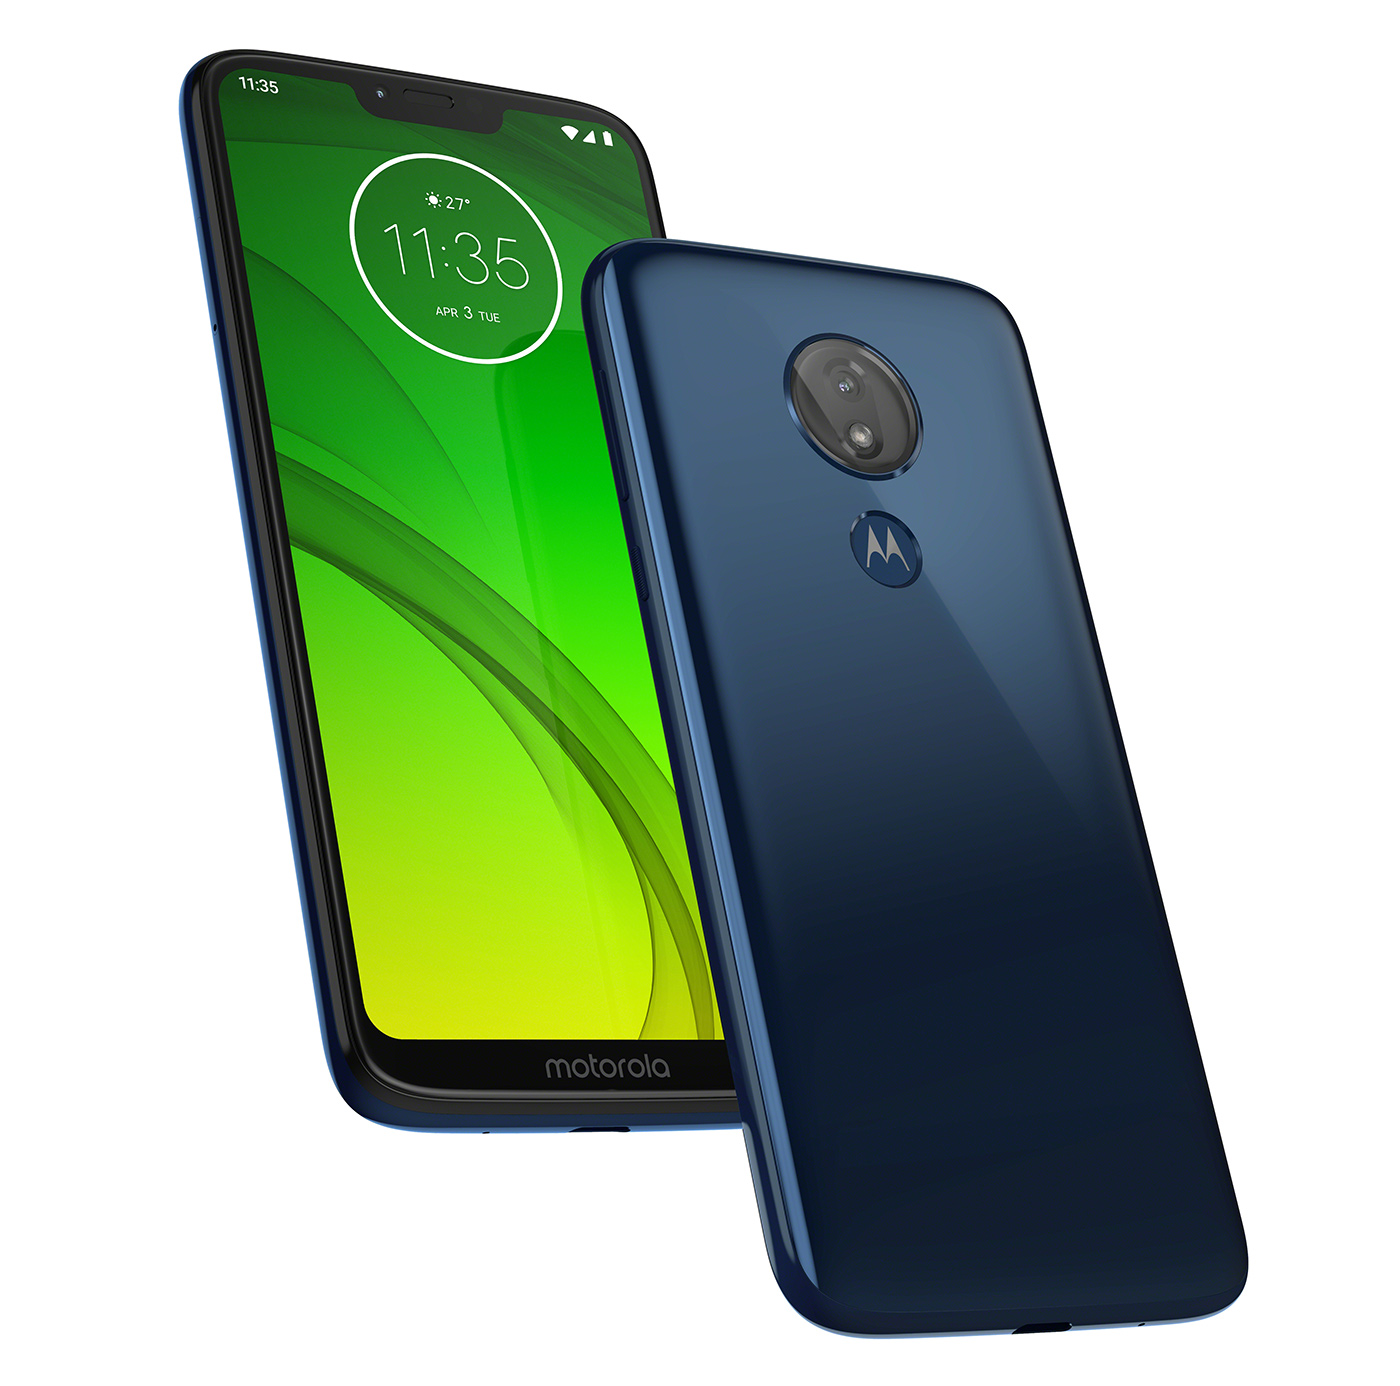 Moto G7 Power official with 5000mAh battery, coming to T